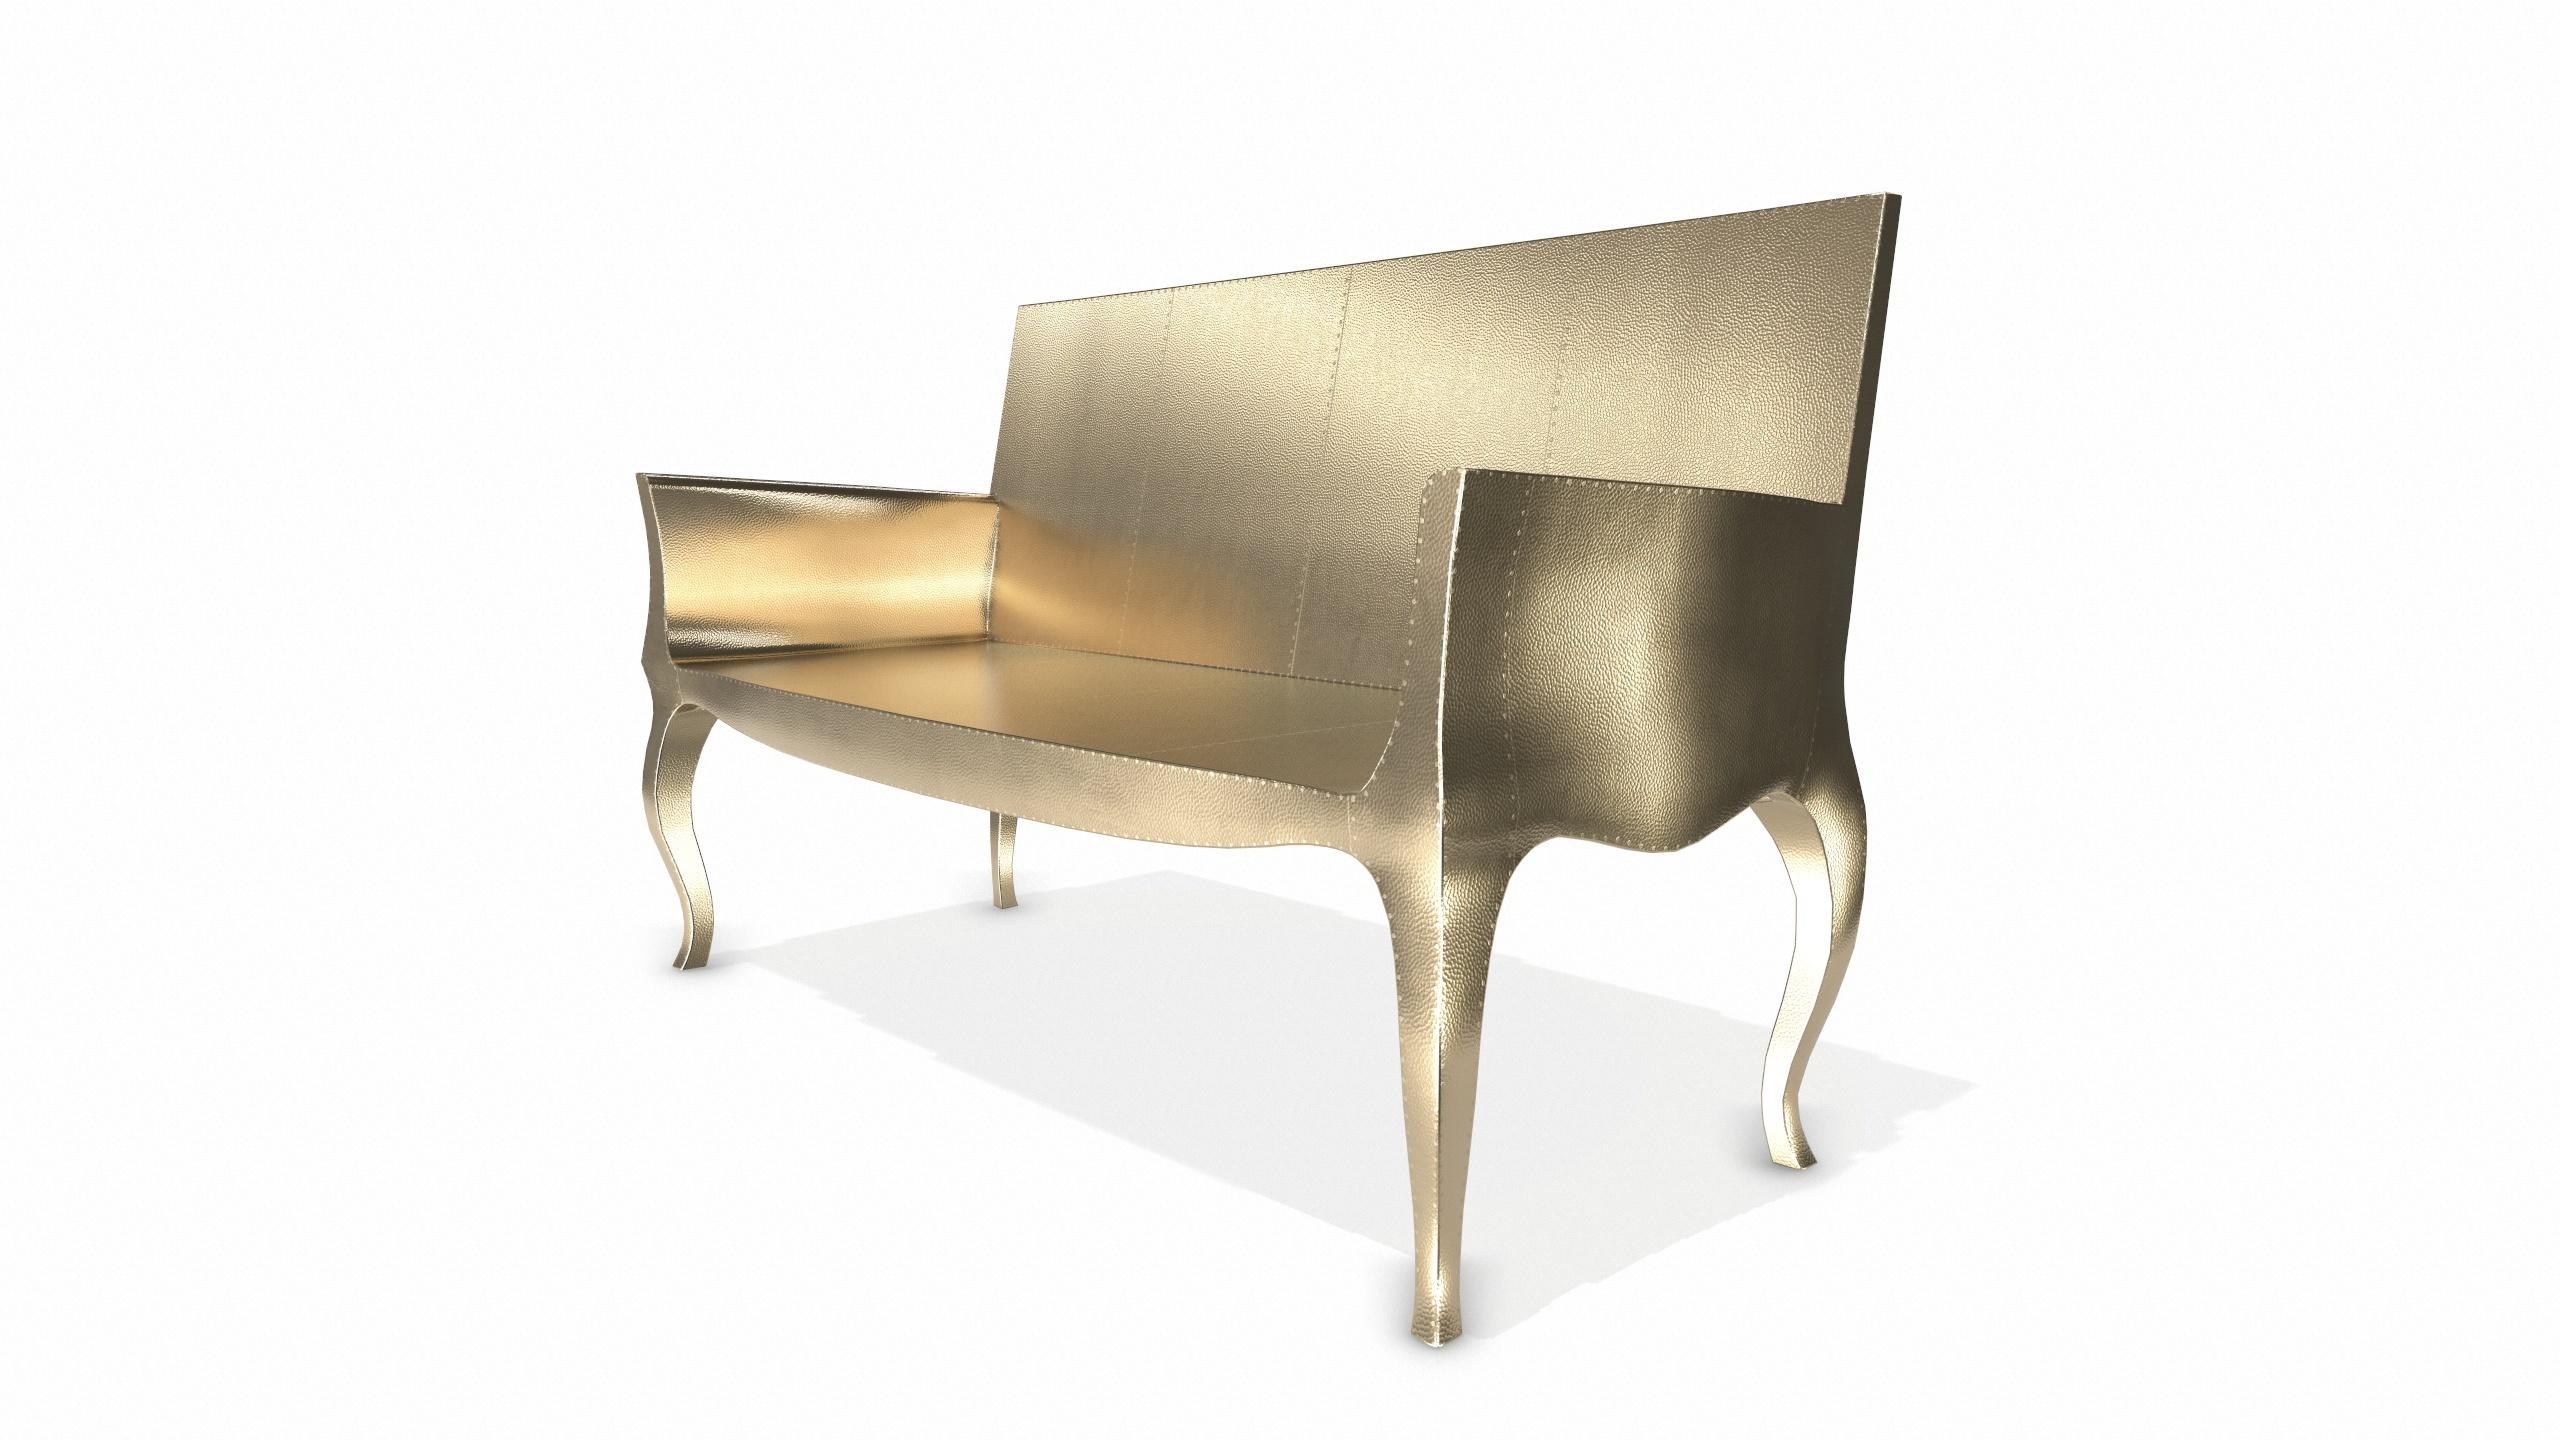 Hand-Crafted Louise Settee Art Deco Daybeds in Mid. Hammered Brass by Paul Mathieu For Sale